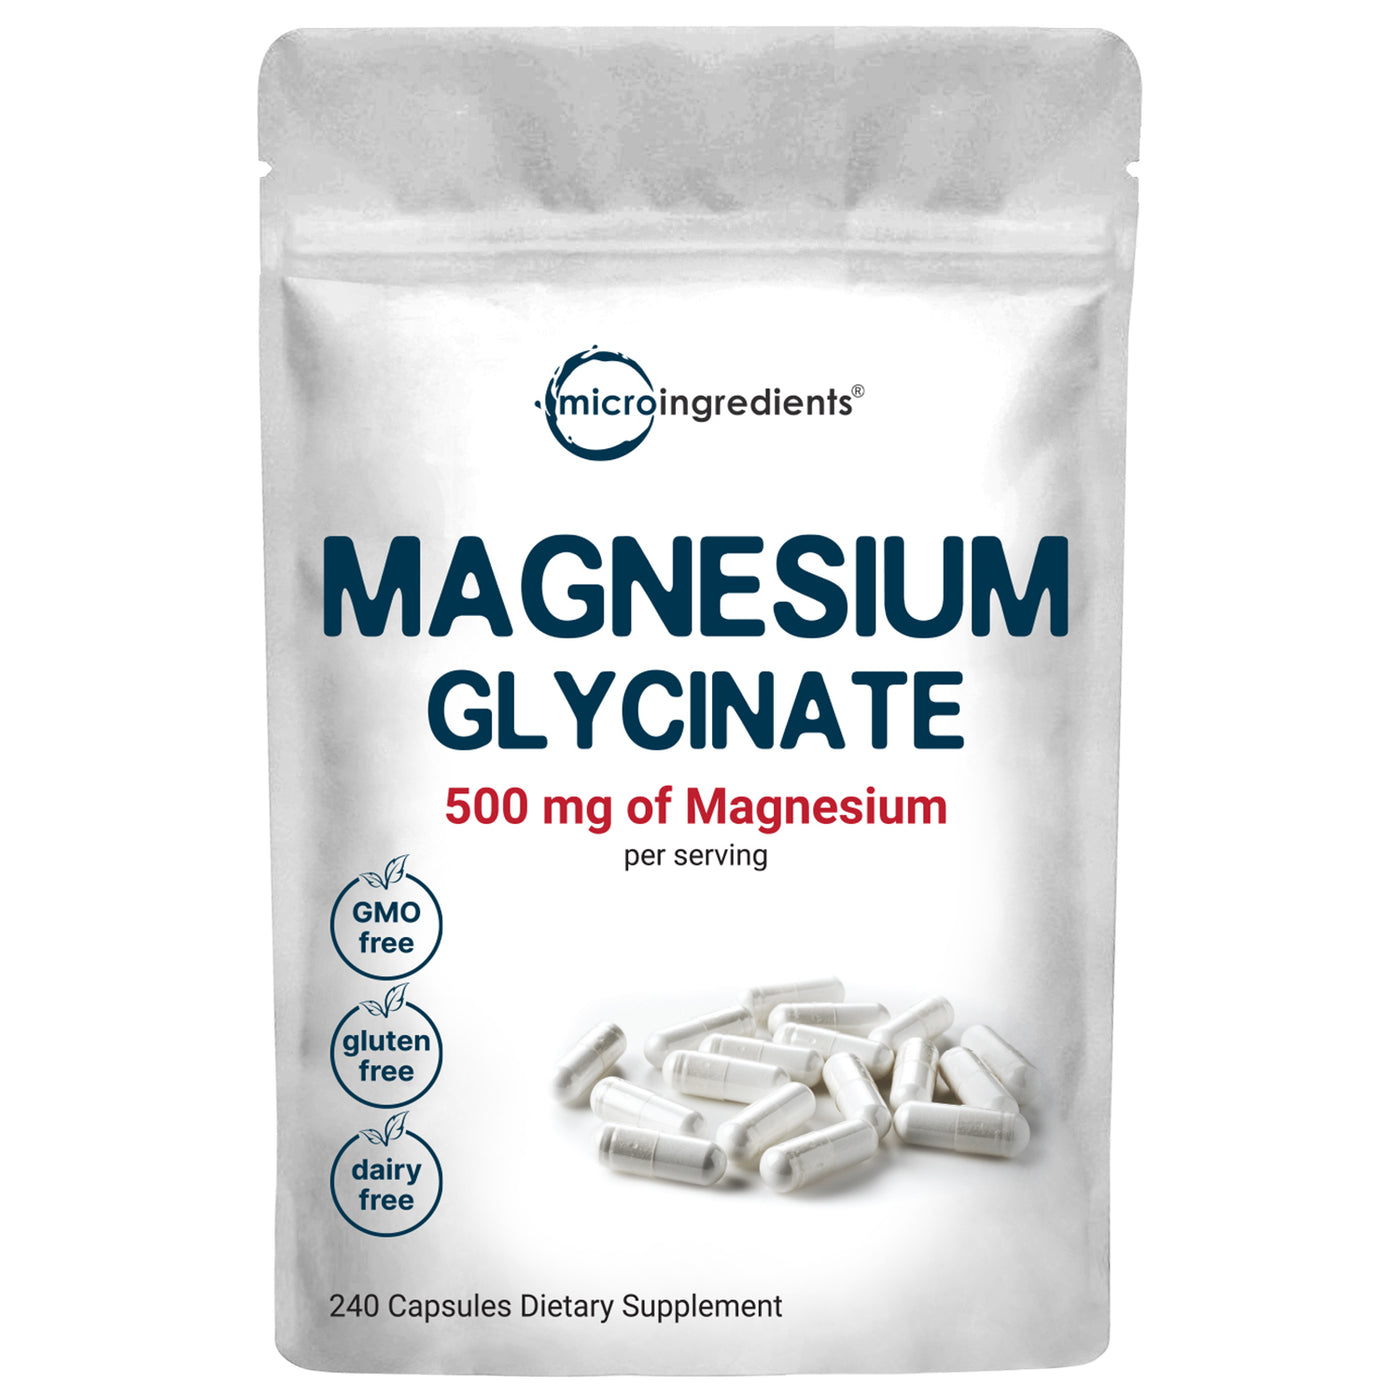 Magnesium Glycinate 500mg - Pure & High Potency